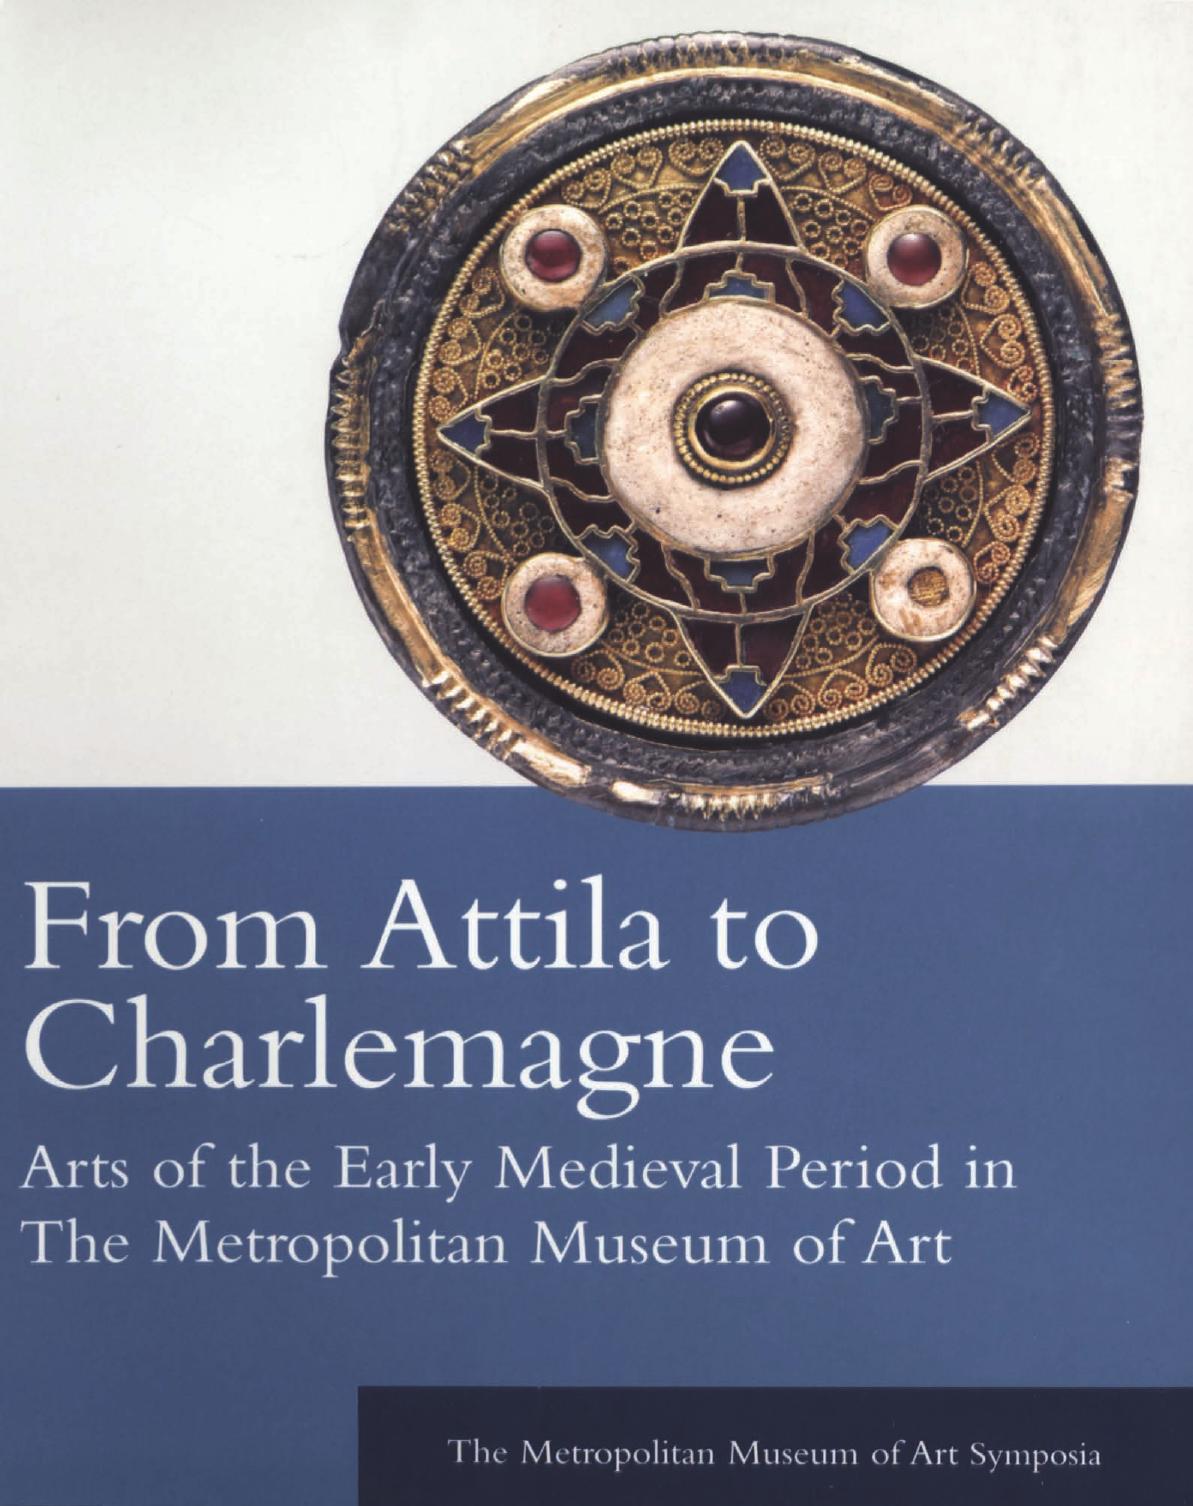 Brown K. R. From Attila to Charlemagne. Arts of the Early Medieval Period in The Metropolitan Museum (2000) by Unknown